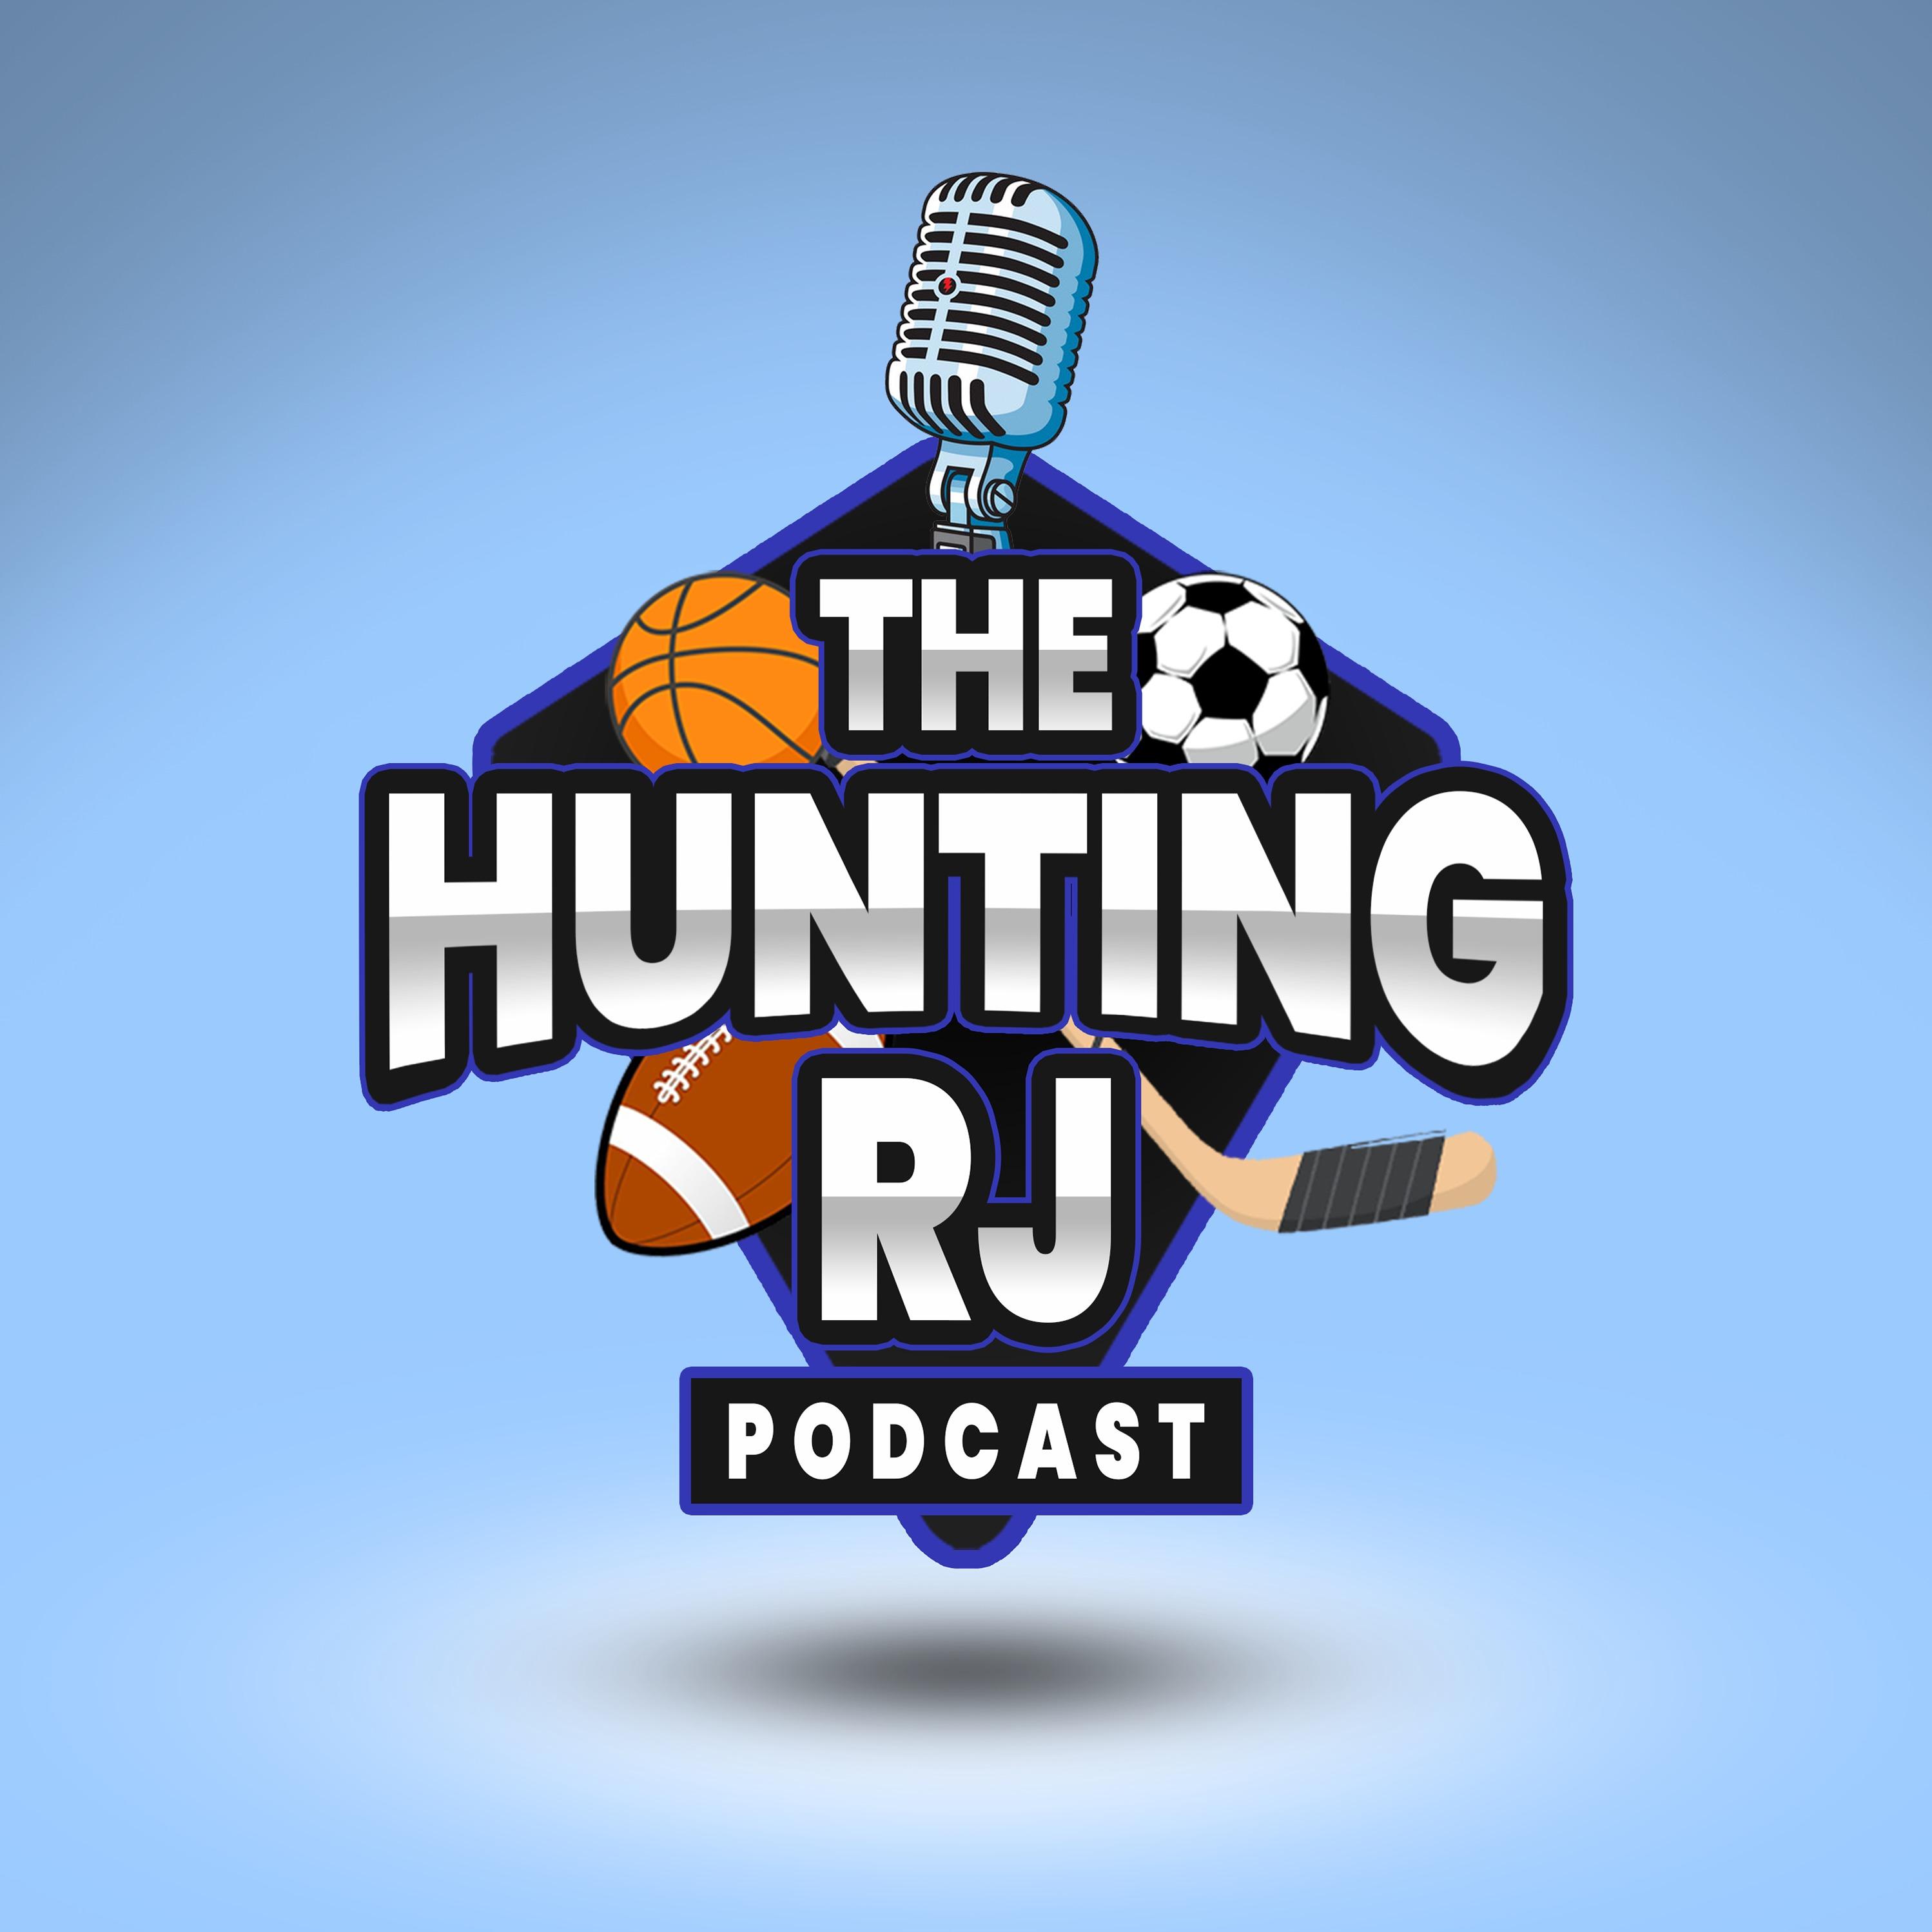 The Hunting RJ Podcast